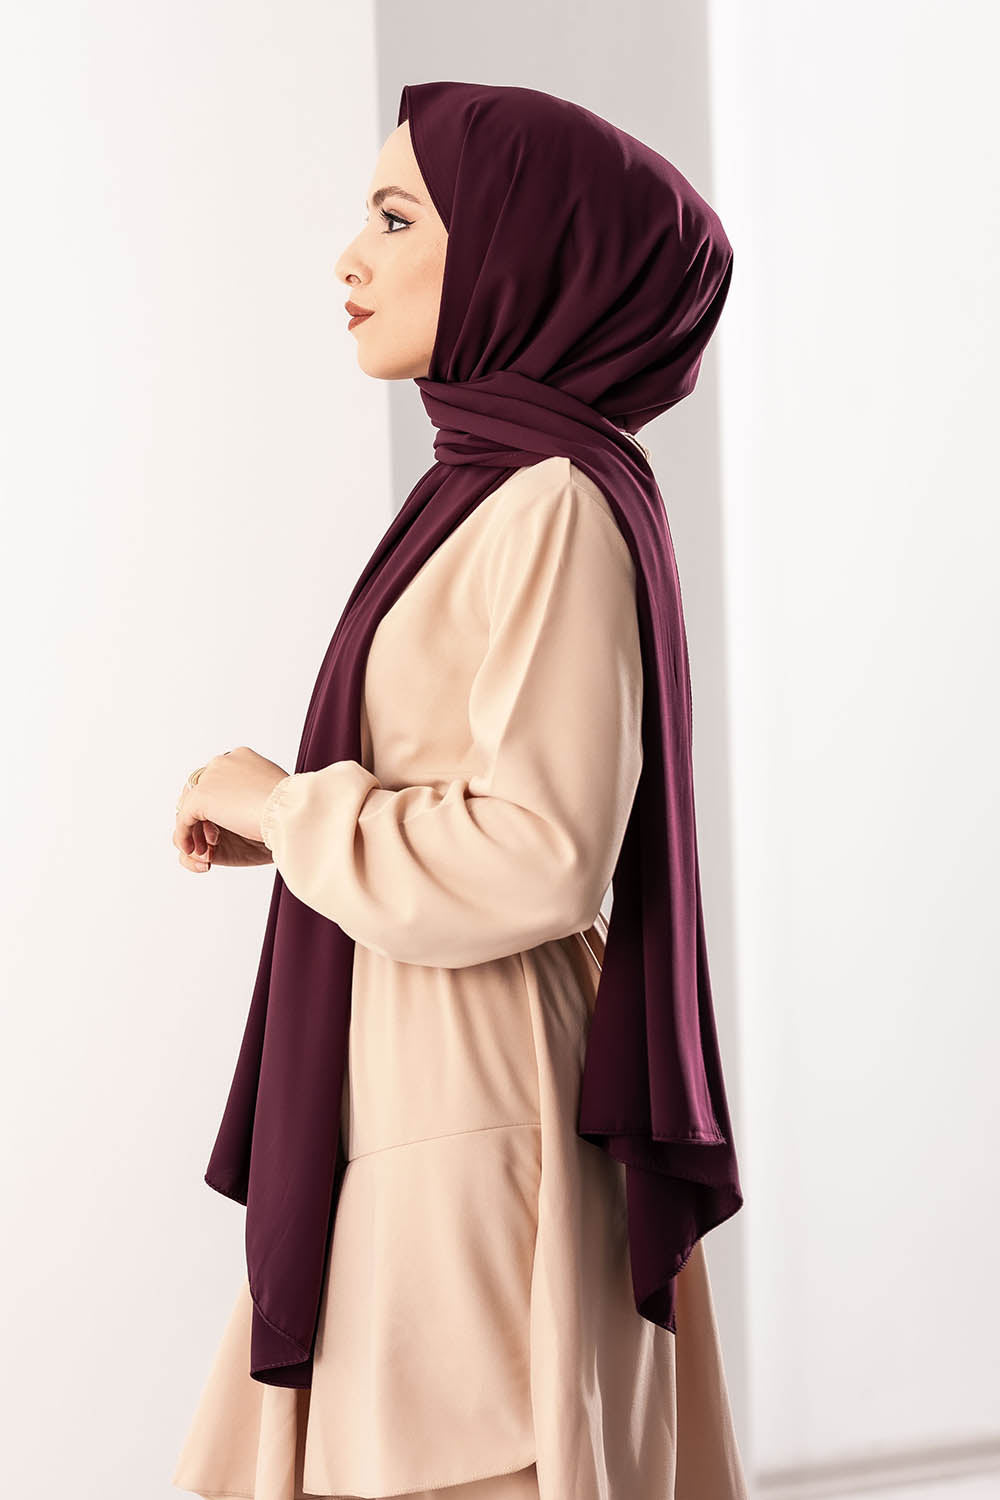 Women abaya with hijab attached For sale in USA